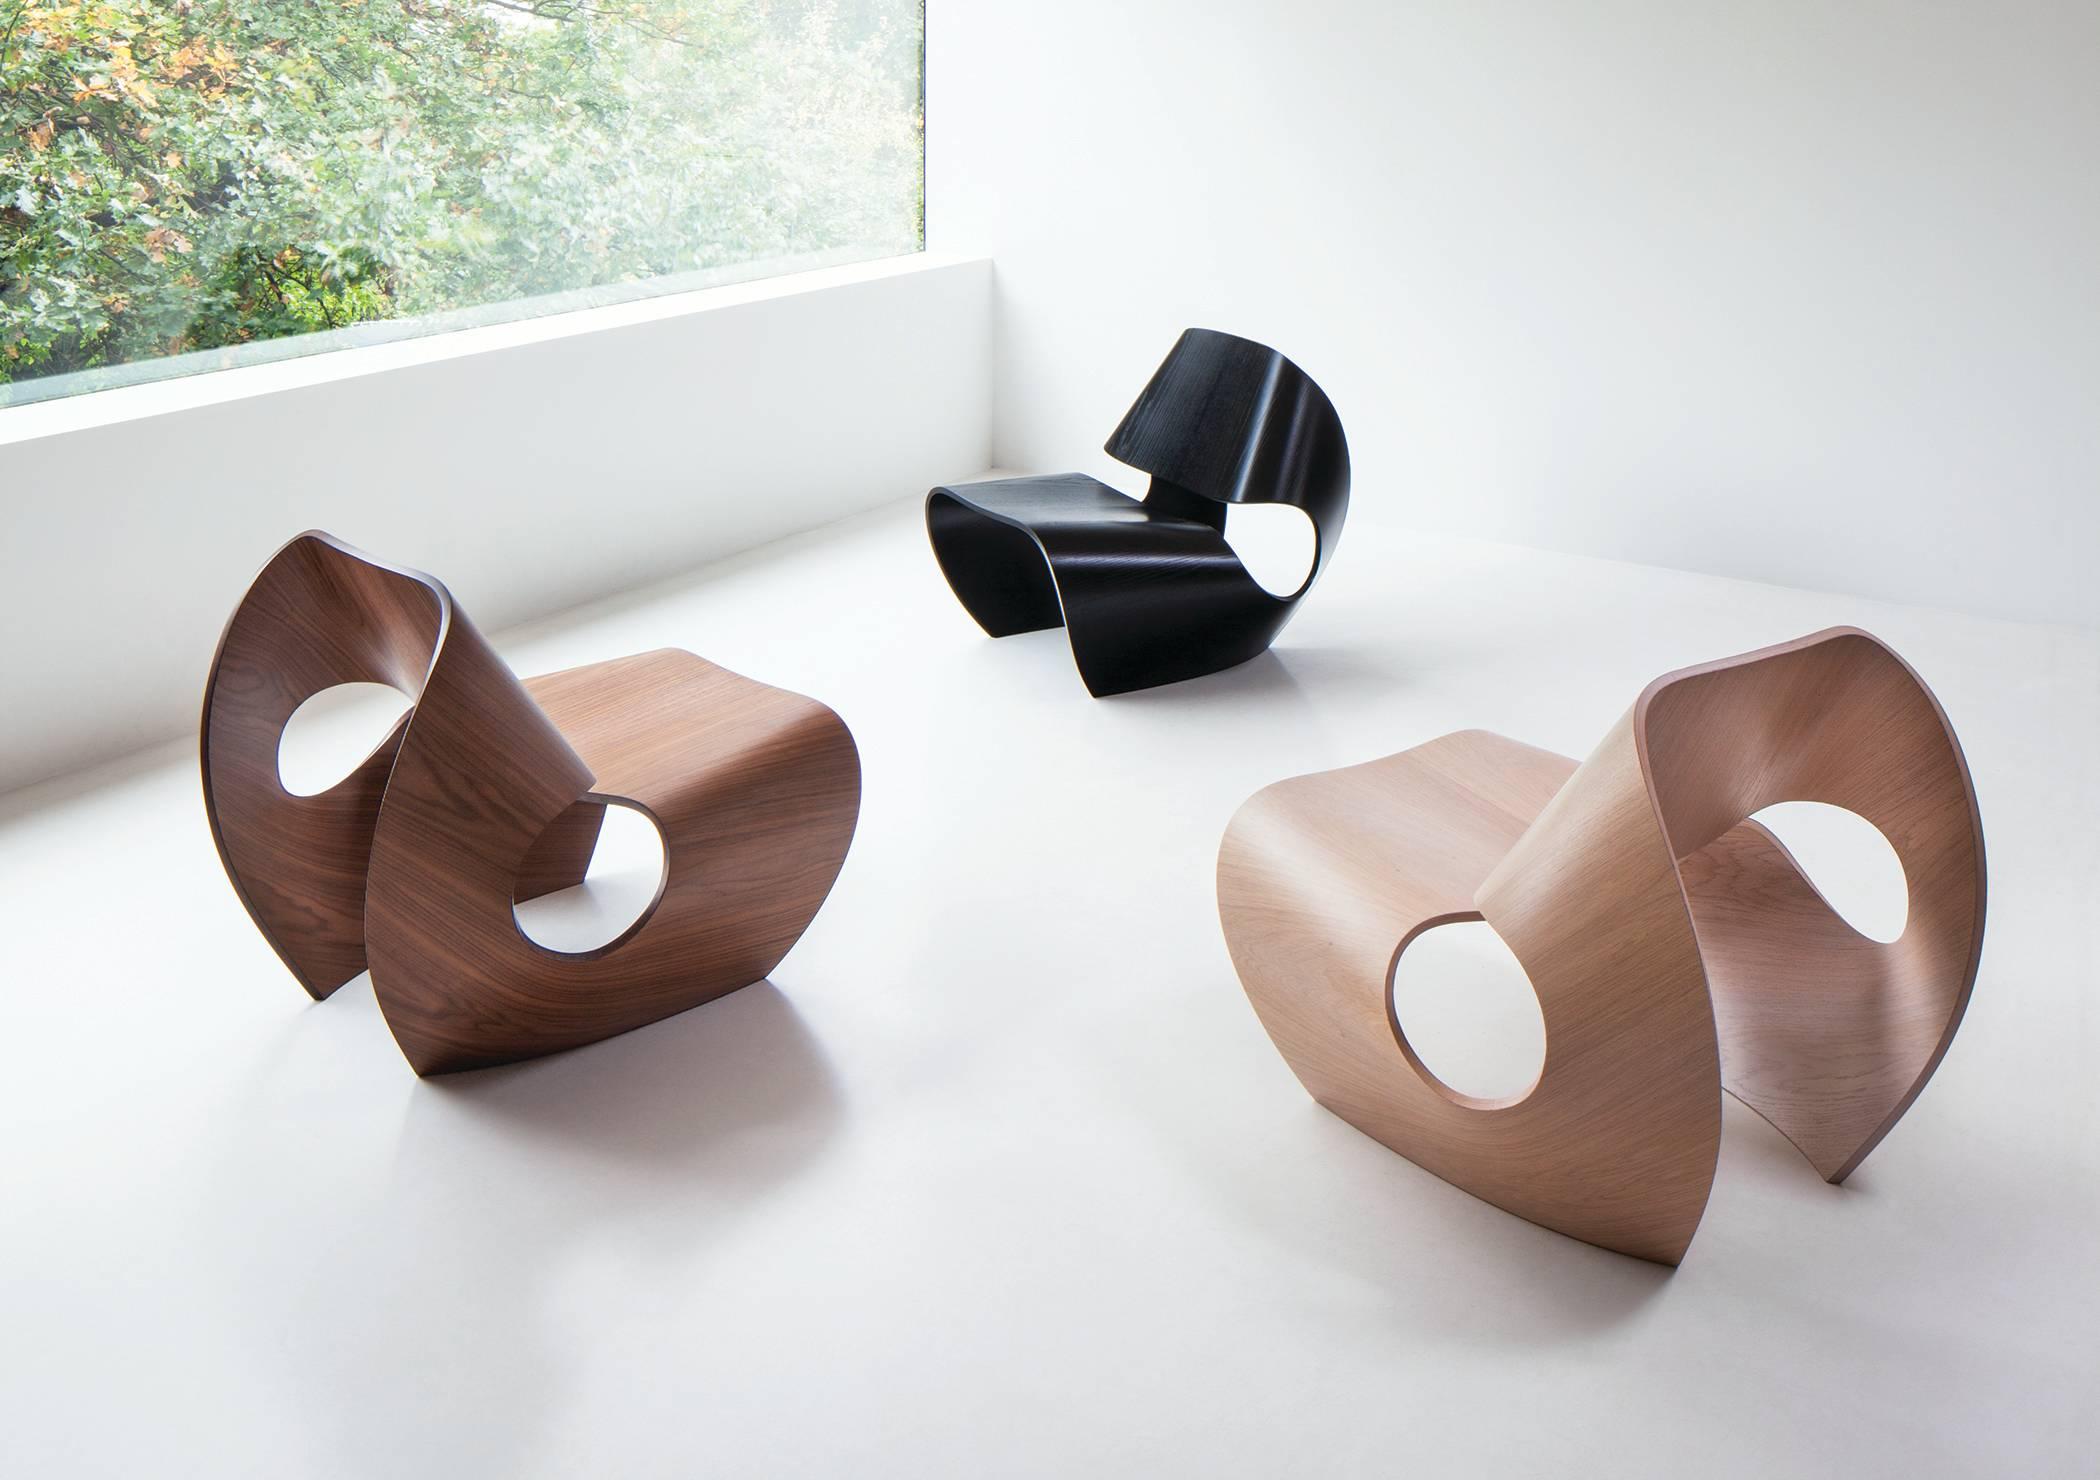 The contemporary Cowrie chair is a rock solid easy chair inspired by the concave lines of sea shells. The curvilinear forms are the result of an extensive research and innovation process that bridges the handmade with the digital. Sweeping lines are